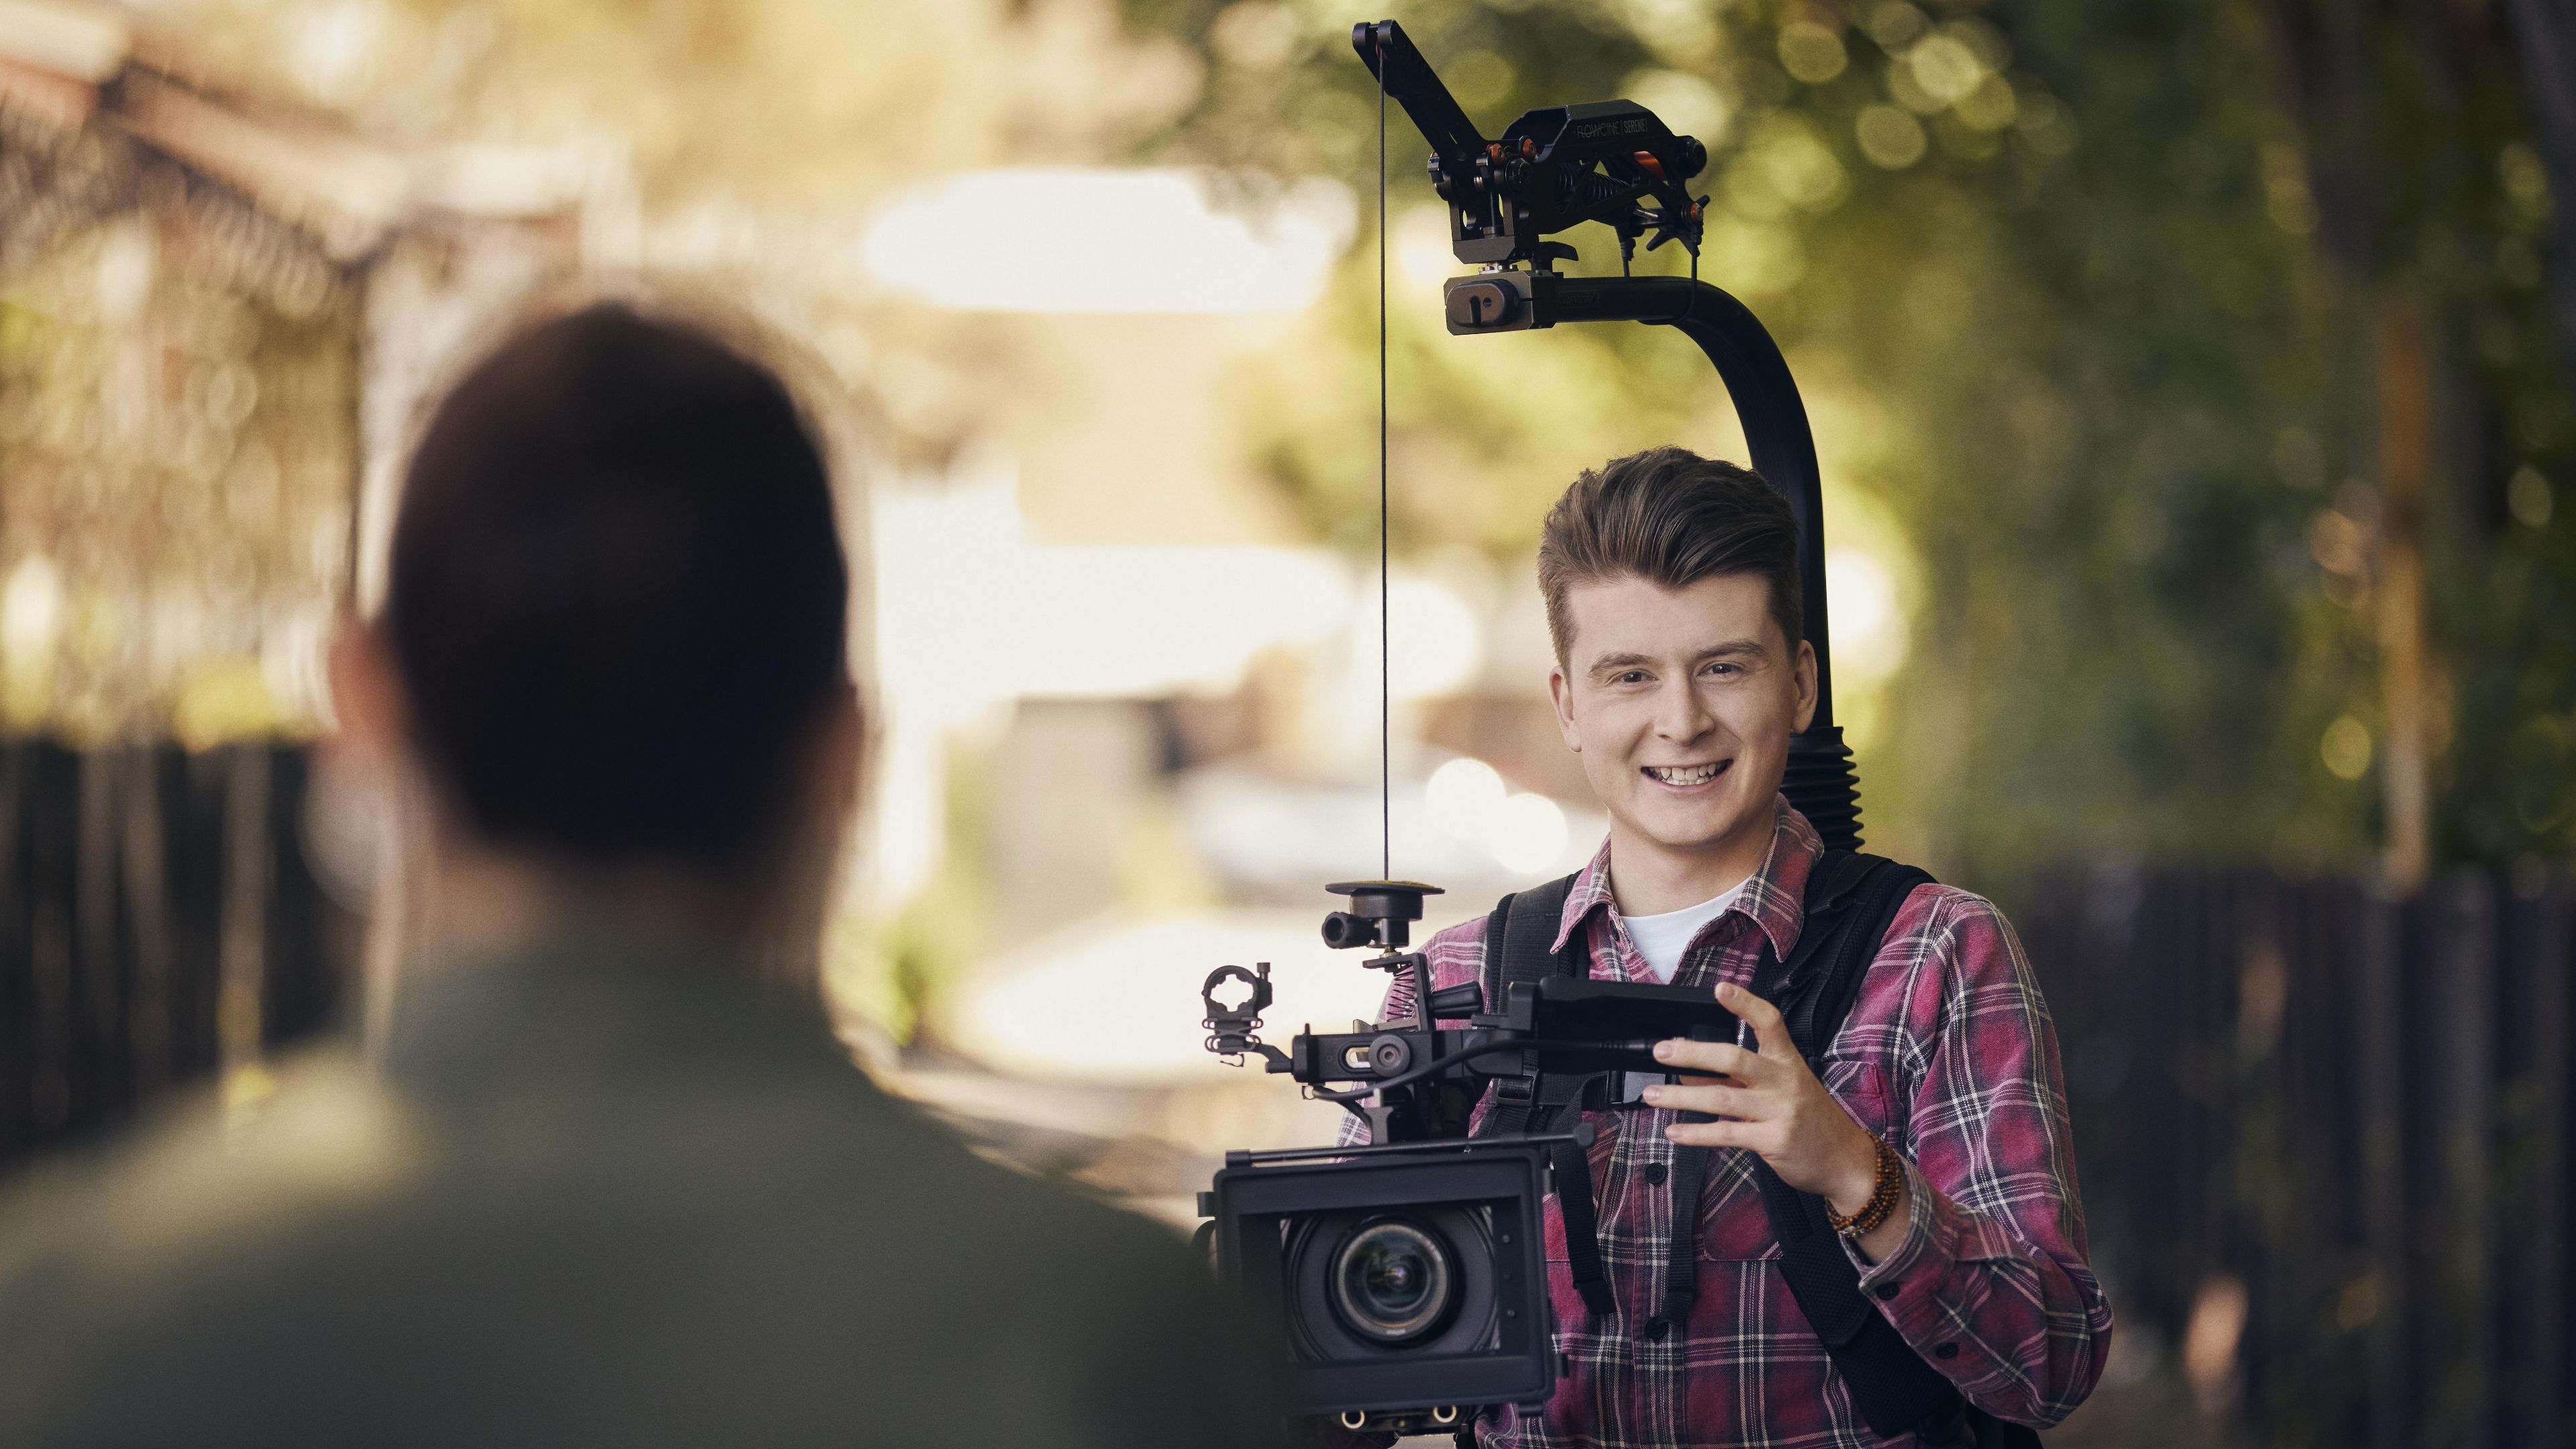 Certificate IV in Screen and Media student Bailey is filming his fellow student as part of his TAFE course on Swinburne's leafy Hawthorn campus.